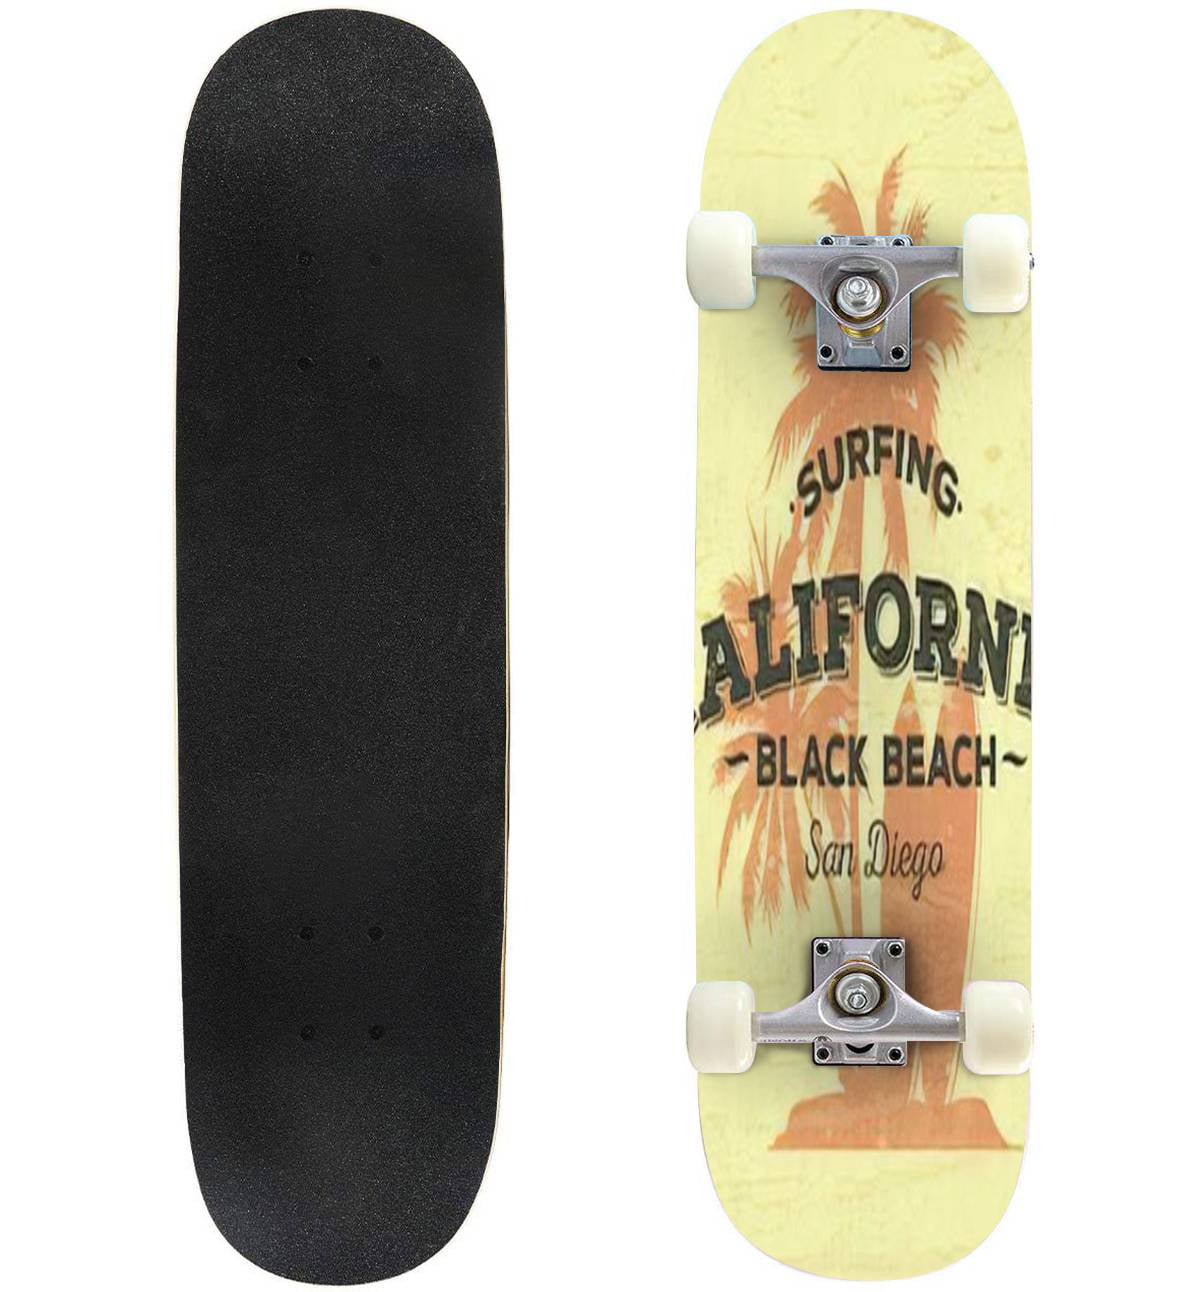 Arena Machtigen Discrepantie Surfing Theme California Outdoor Skateboard 31"x8" Pro Complete Skate Board  Cruiser 8 Layers Double Kick Concave Deck Maple Longboards for Youths  Sports - Walmart.com